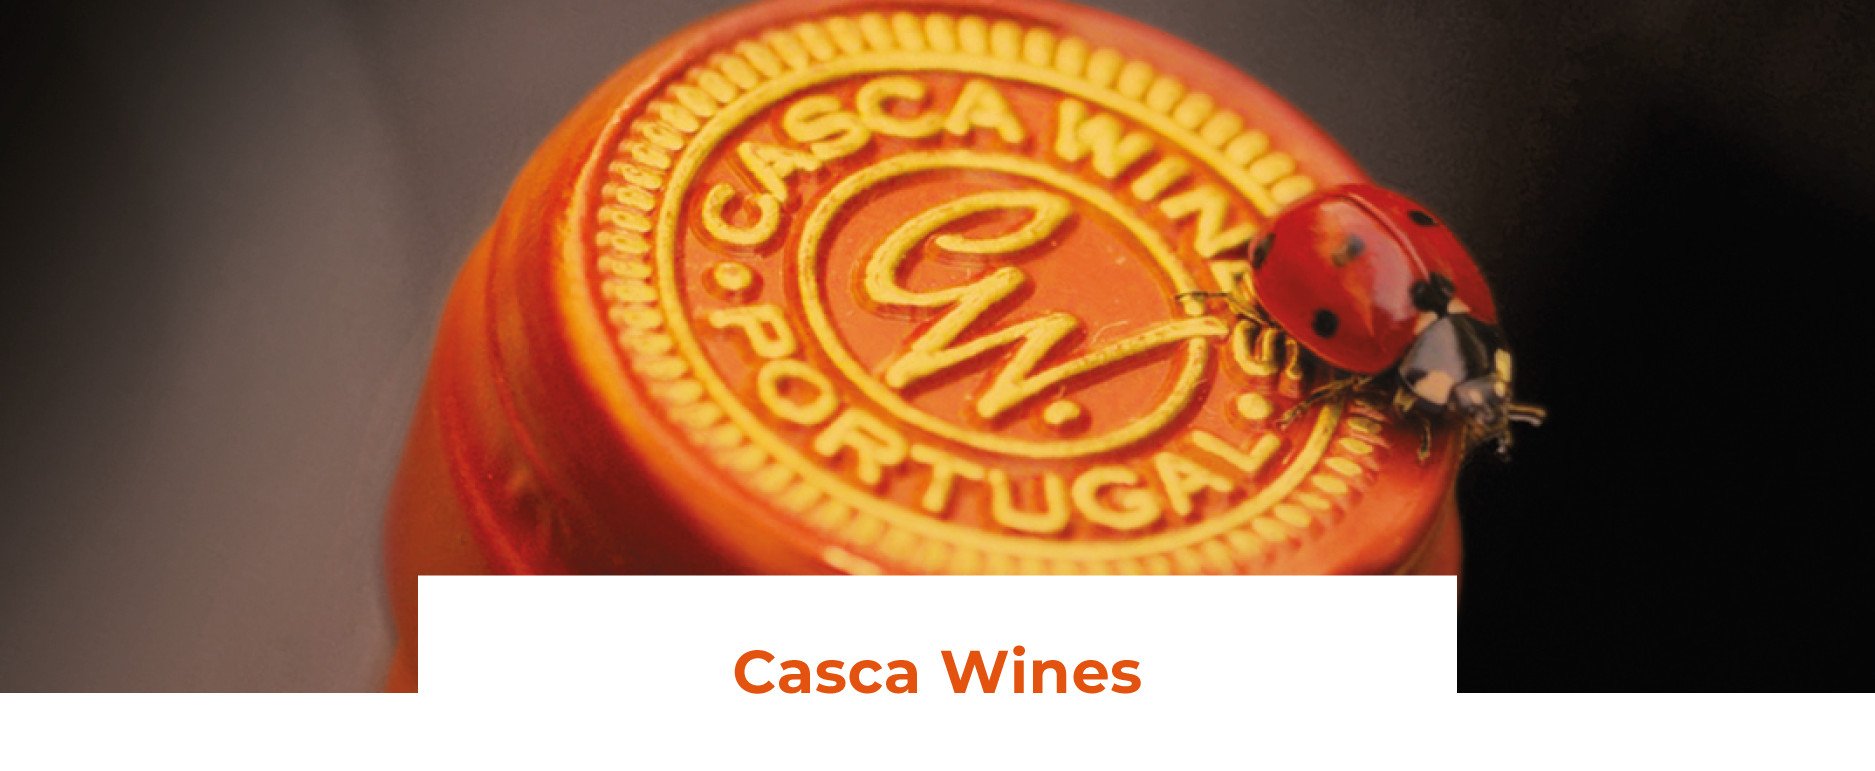 banners-casca-wines-remy-massin-01-compressed